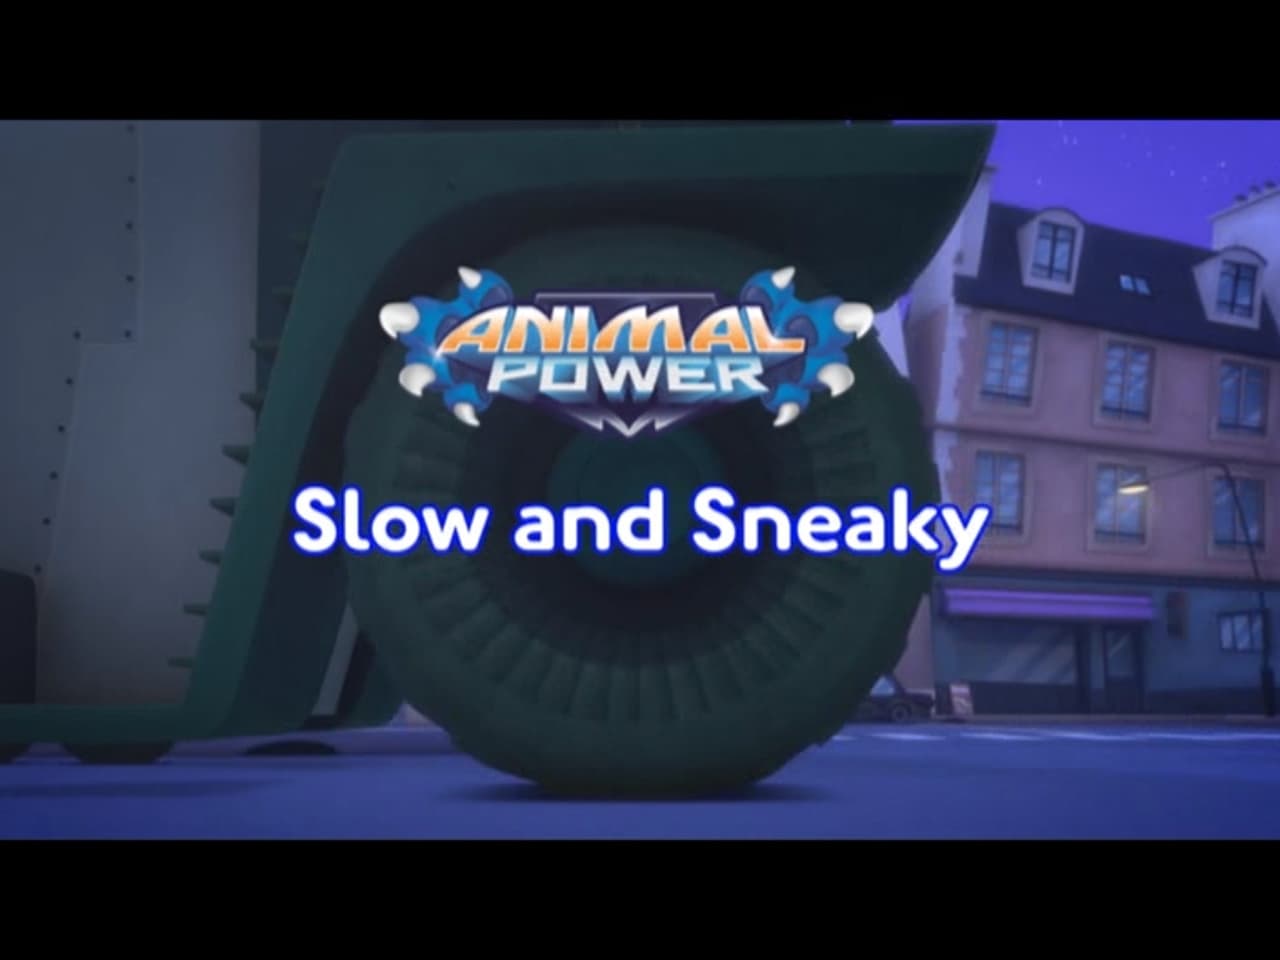 Slow and Sneaky